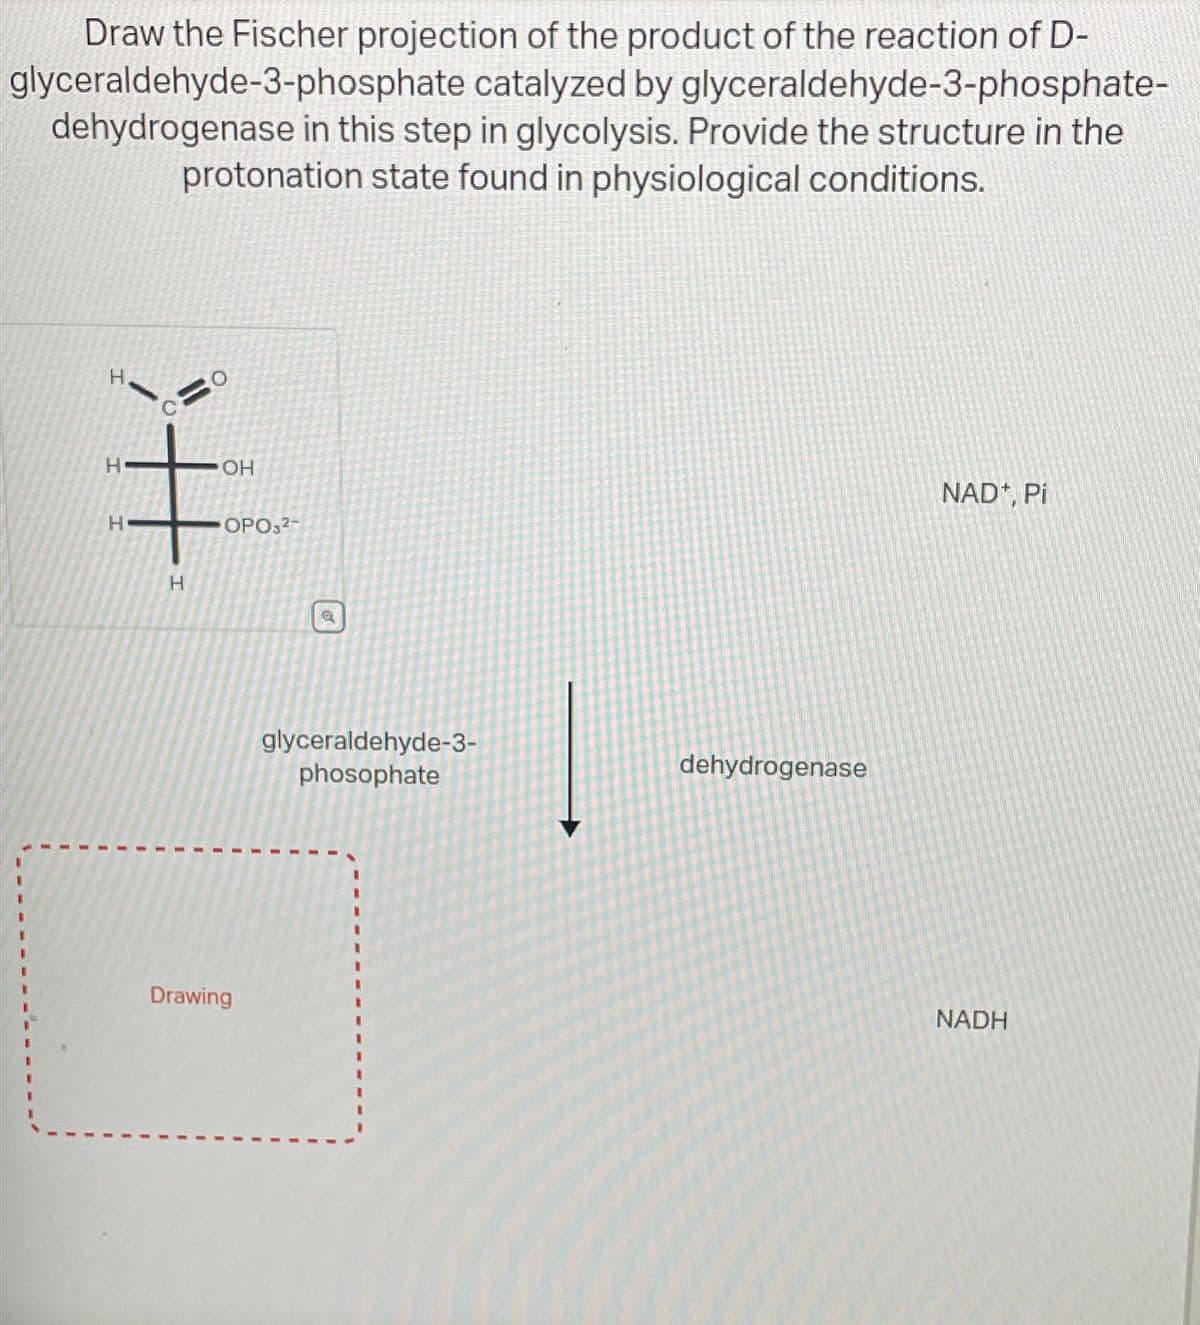 Draw the Fischer projection of the product of the reaction of D-
glyceraldehyde-3-phosphate catalyzed by glyceraldehyde-3-phosphate-
dehydrogenase in this step in glycolysis. Provide the structure in the
protonation state found in physiological conditions.
H
OH
OPO2-
H
Drawing
。
glyceraldehyde-3-
phosophate
dehydrogenase
NAD+, Pi
NADH